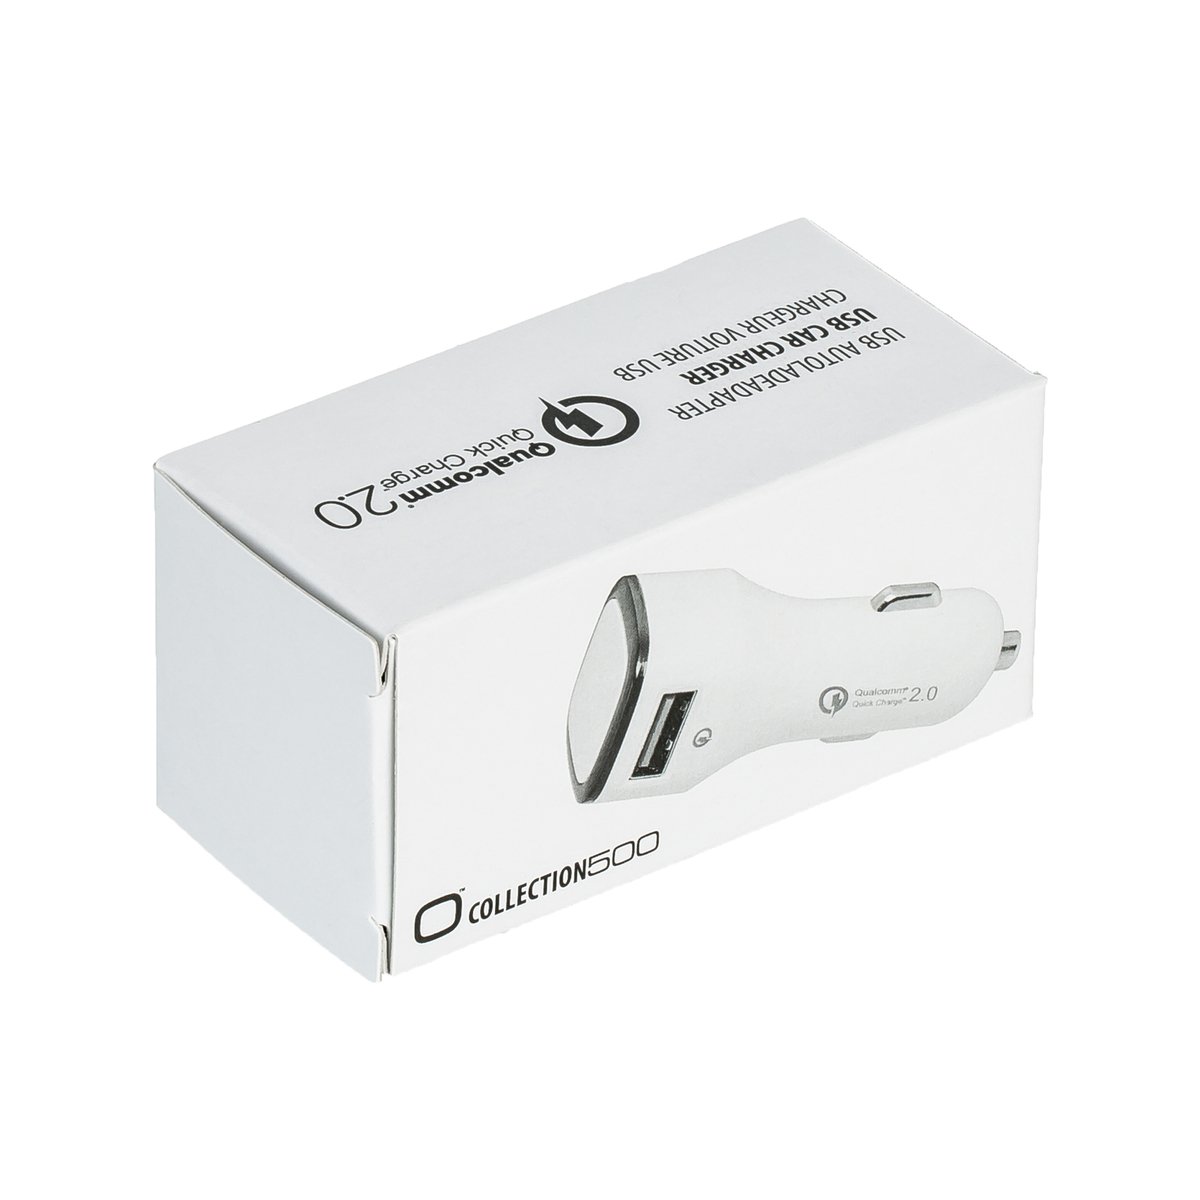 USB-Autoladeadapter Quick Charge 2.0® COLLECTION 500 schwarz